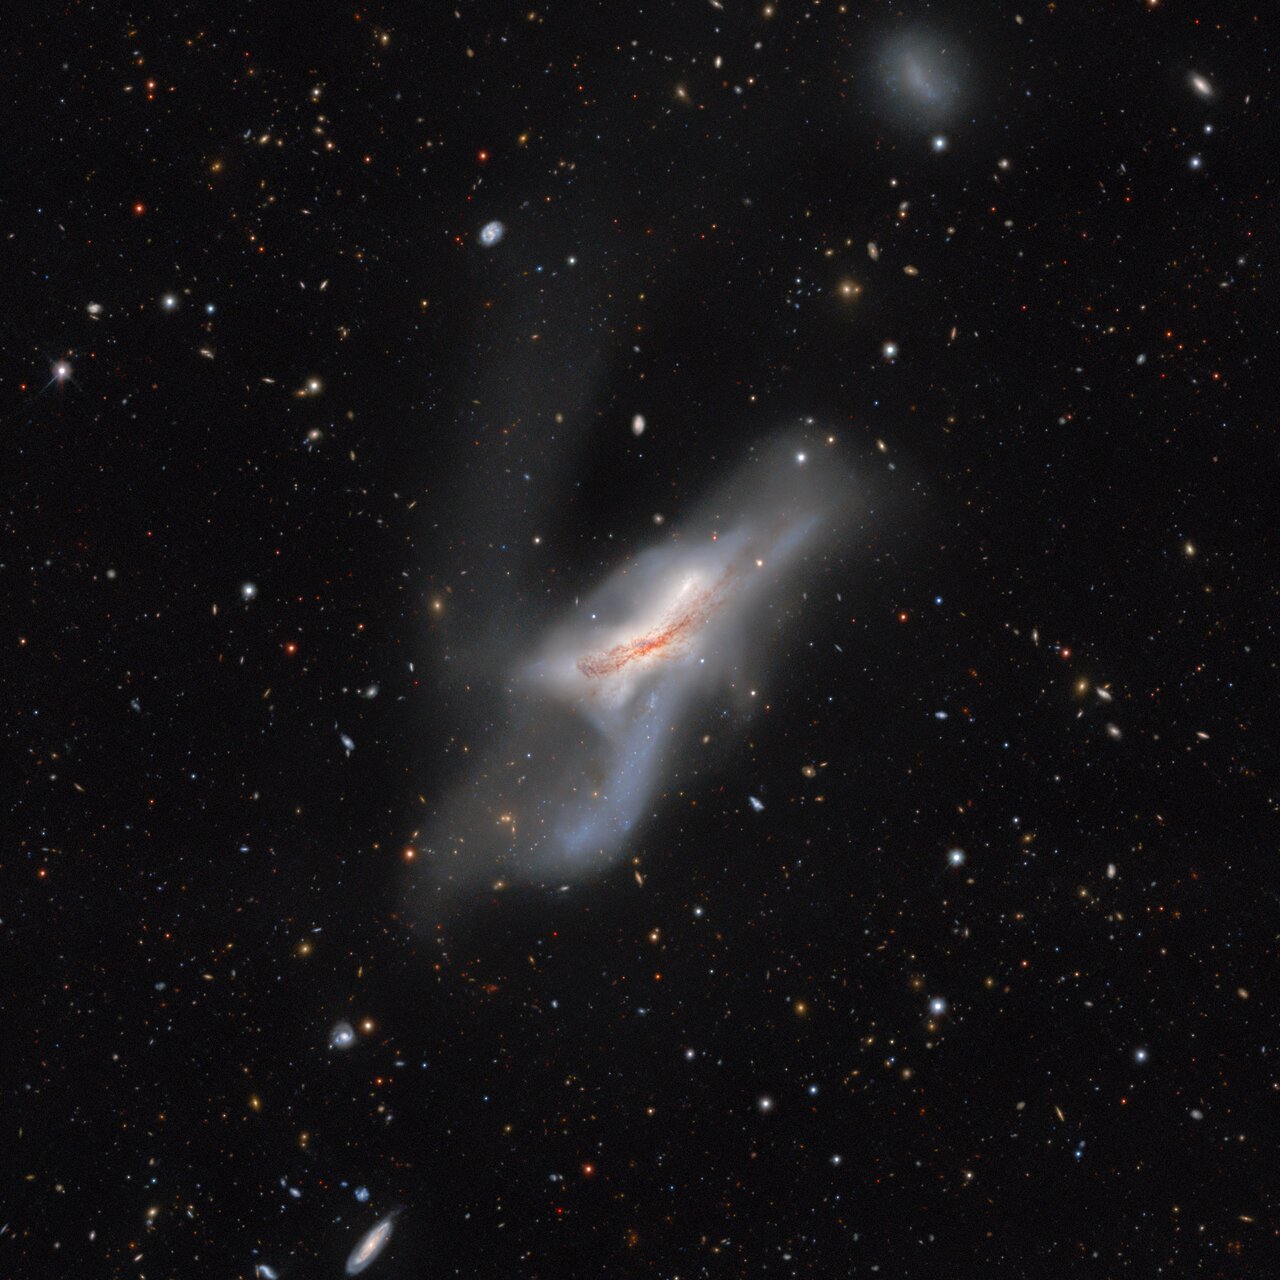 A galactic collision of two galaxies which began more than 300 million years ago, NGC 520 is actually made up of two disk galaxies which will eventually merge together to form one larger, more massive system. NGC 520 was discovered by William Herschel in 1784 and is one of the largest and brightest galaxies in the Siena Galaxy Atlas.